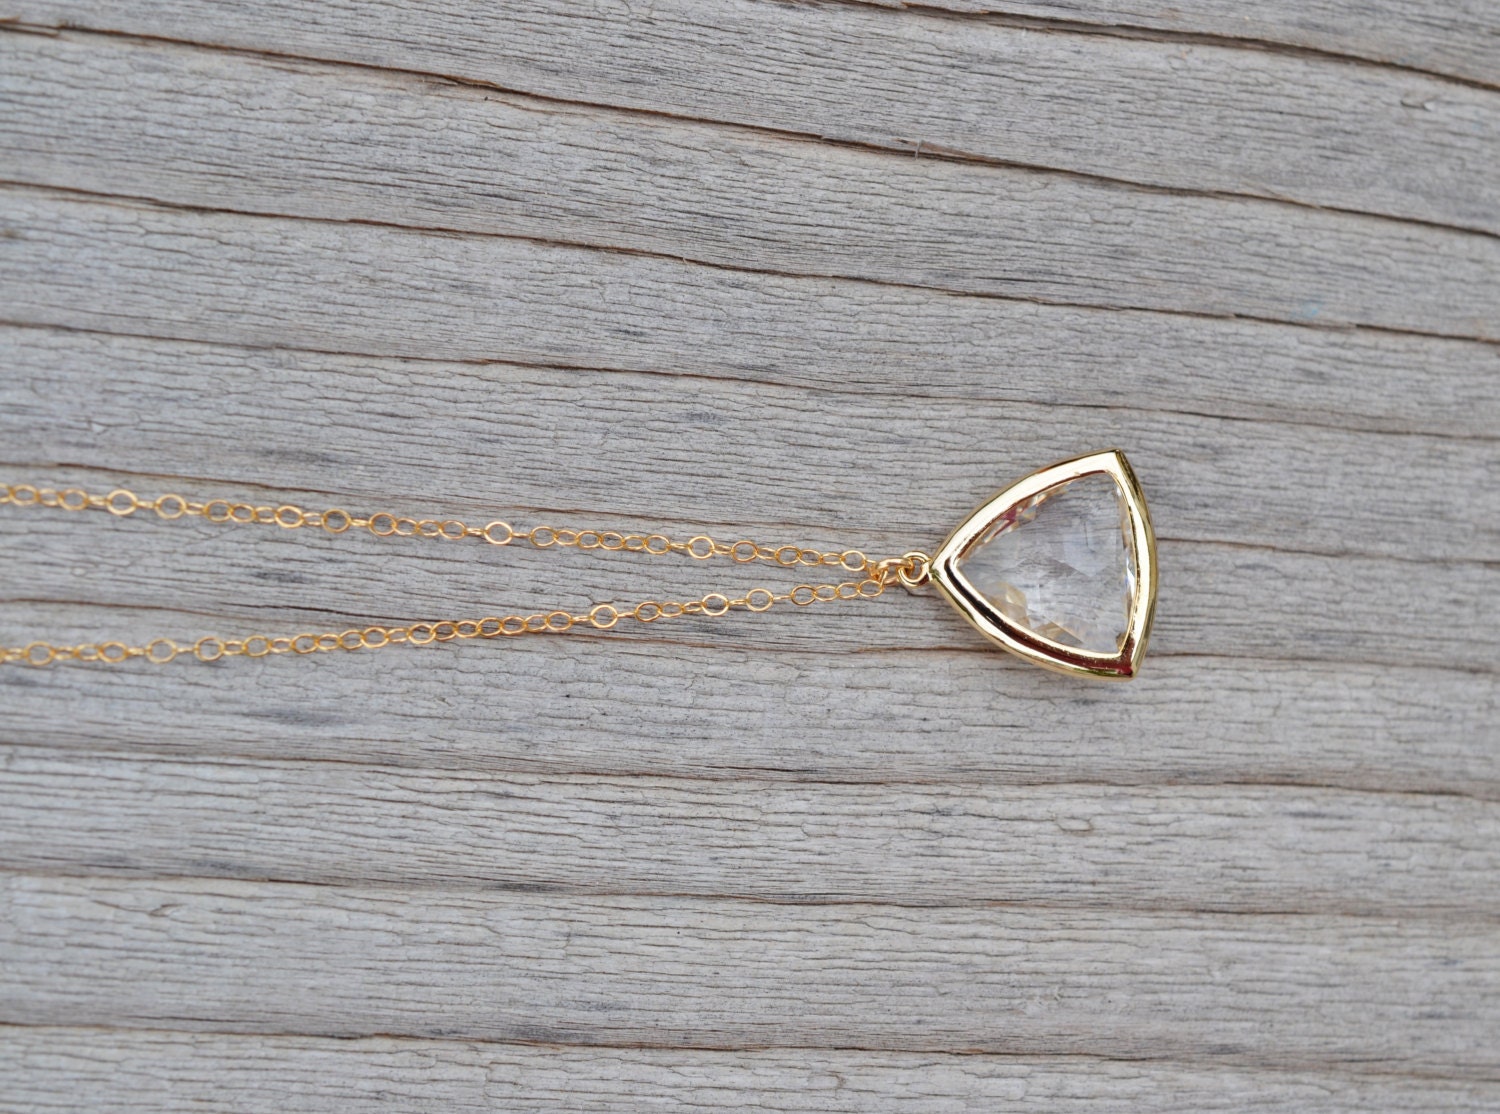 Crystal Triangle Pendant Necklace Pendant Necklace Crystal - Etsy New ...